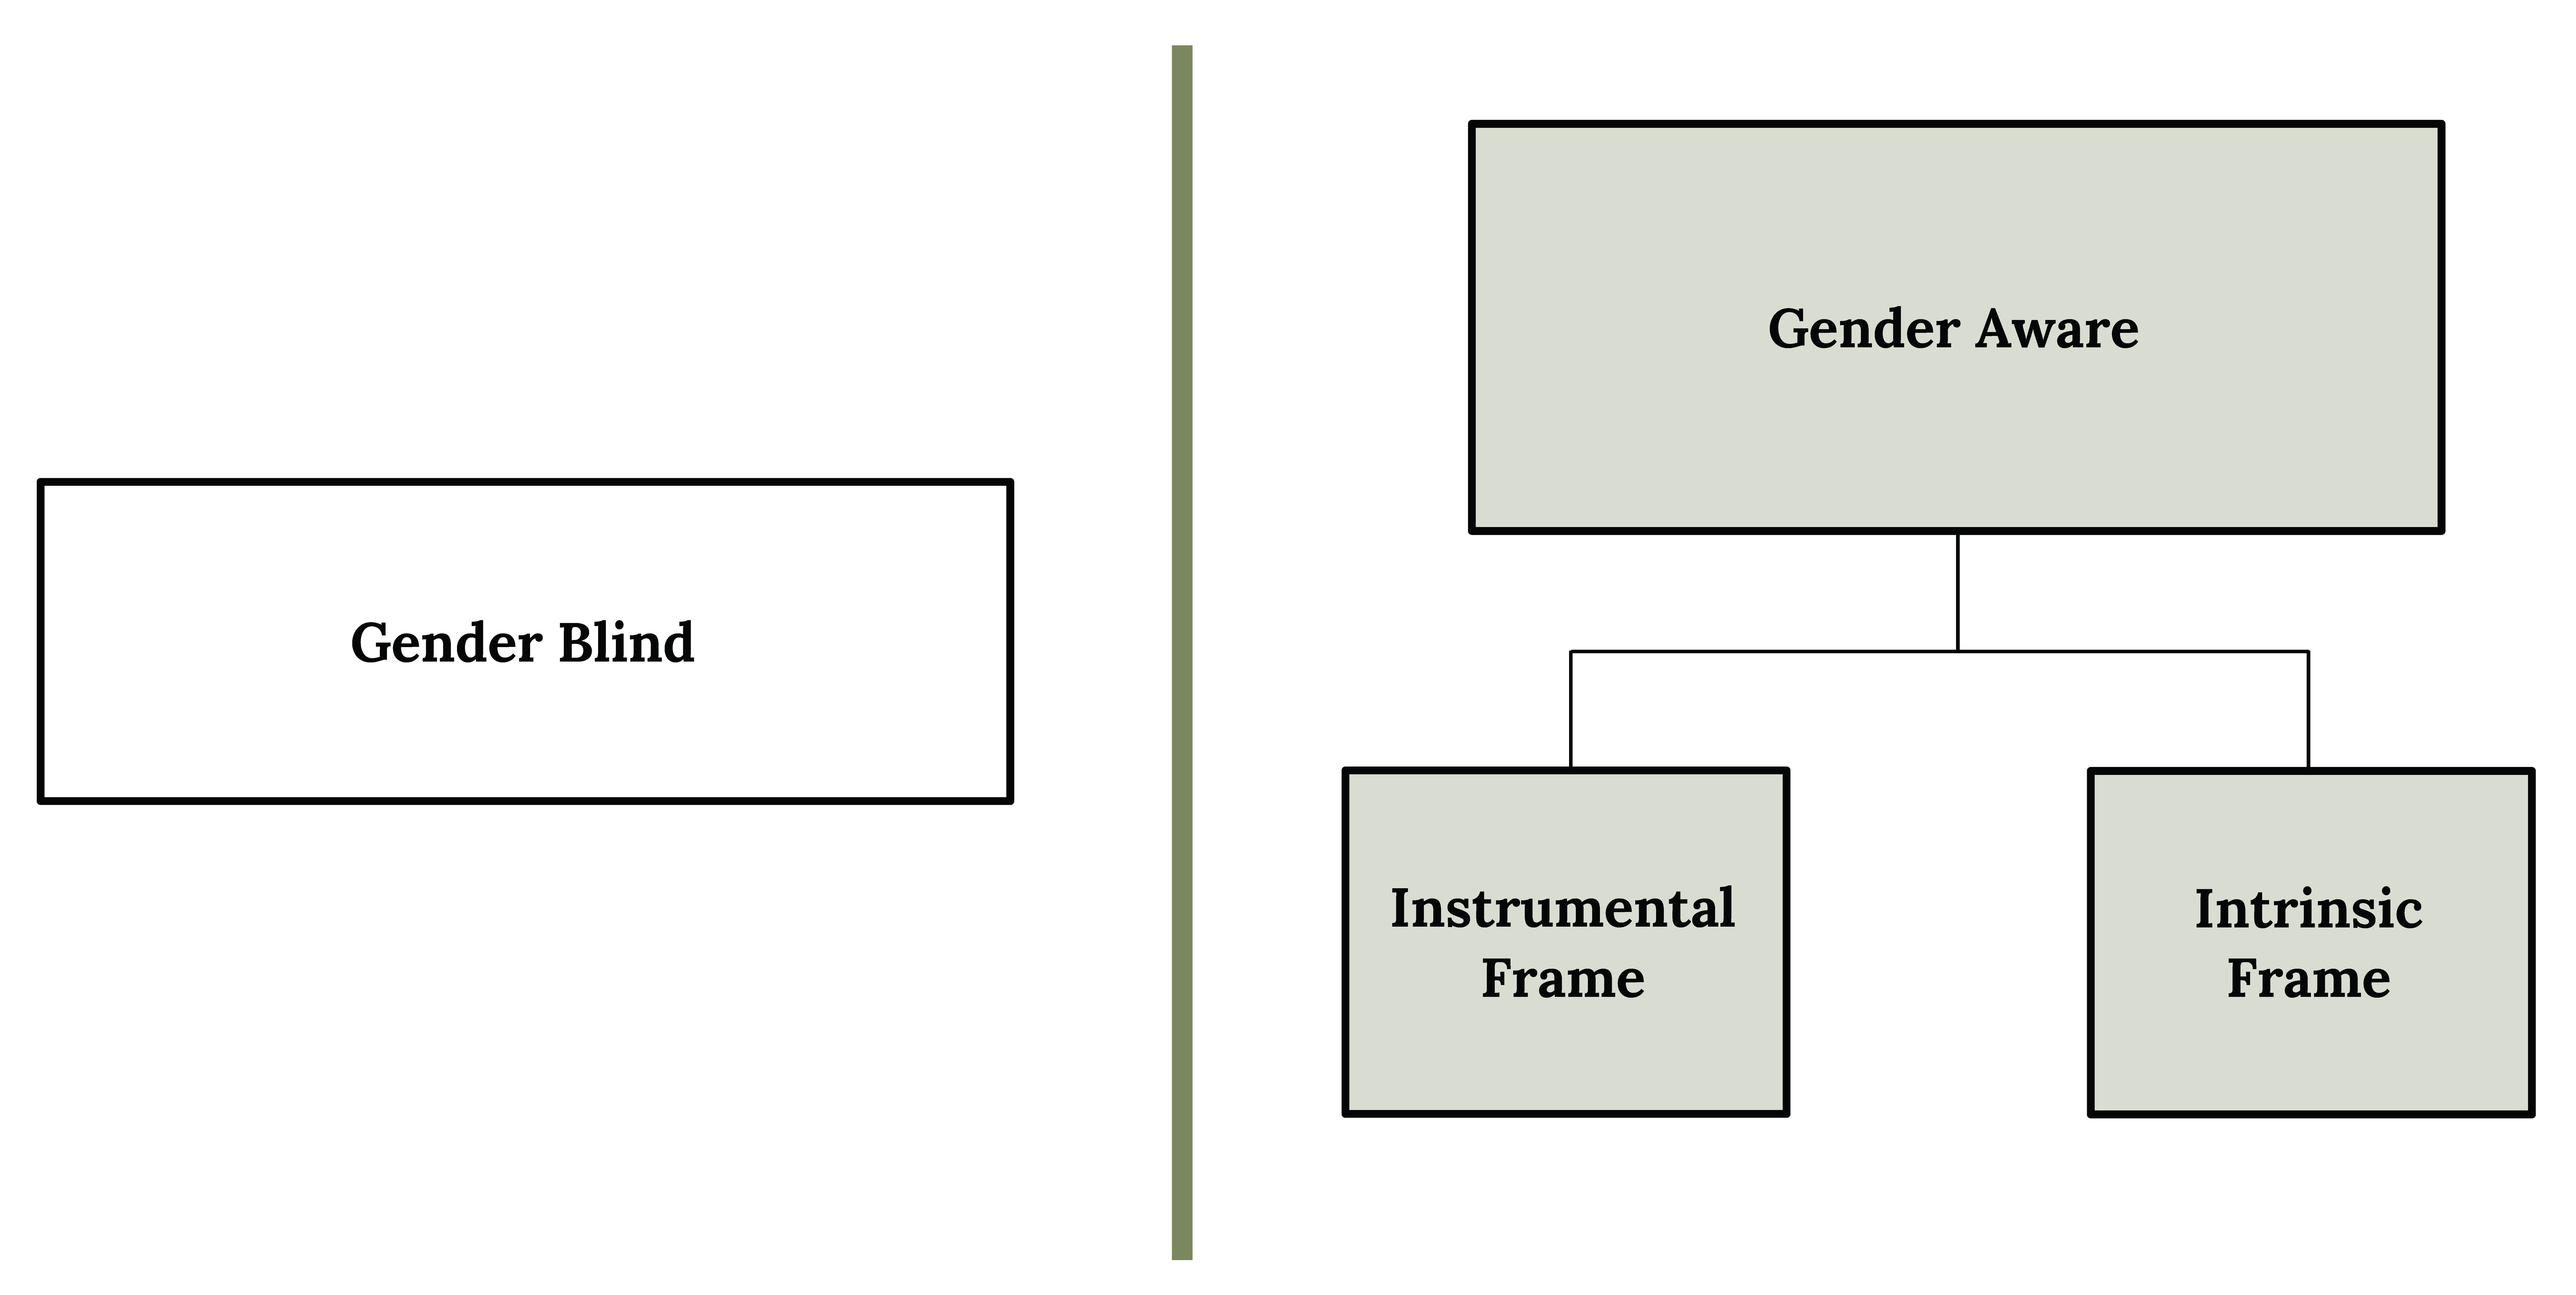 classification of gender blind and gender aware policies with instrumental and intrinsic values